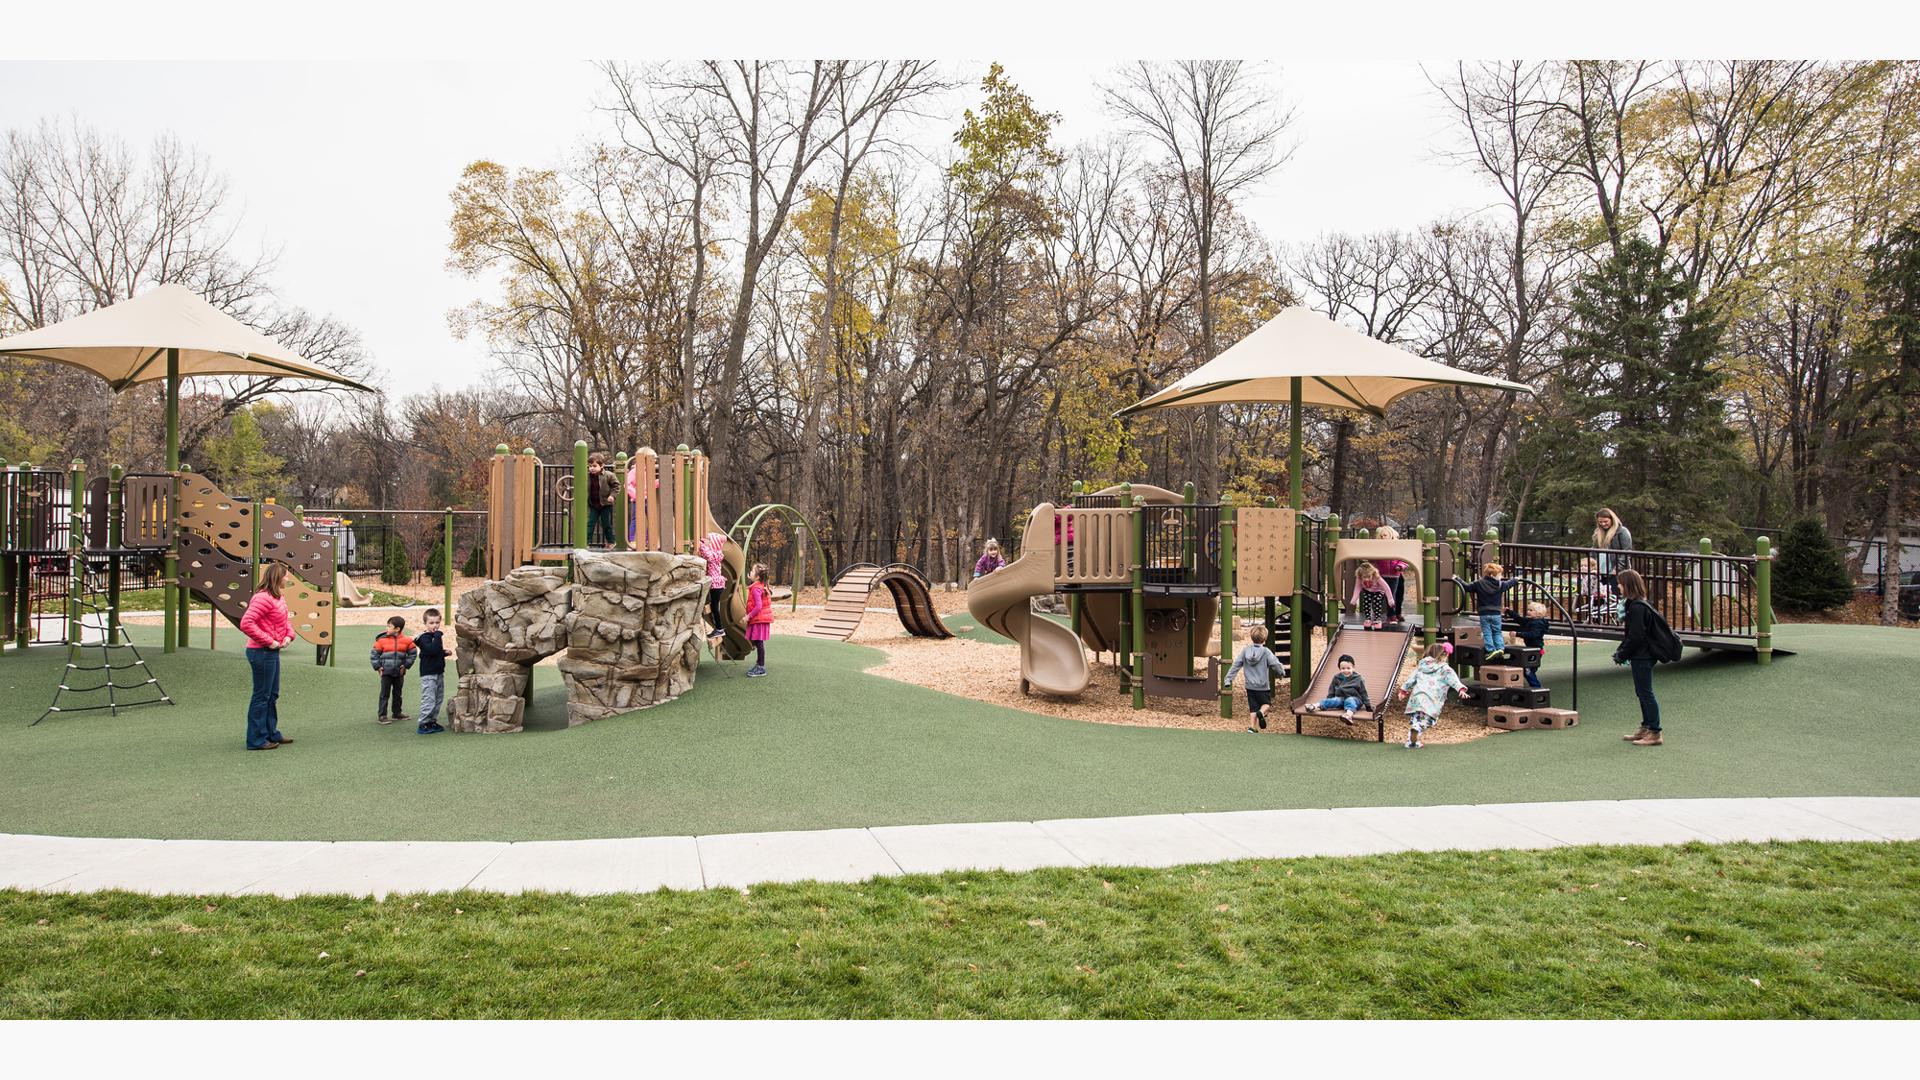 On an overcast day children play on the nature-inspired PlayBooster playground while two moms watch. A narrow tree-line creates a natural border around the playground.